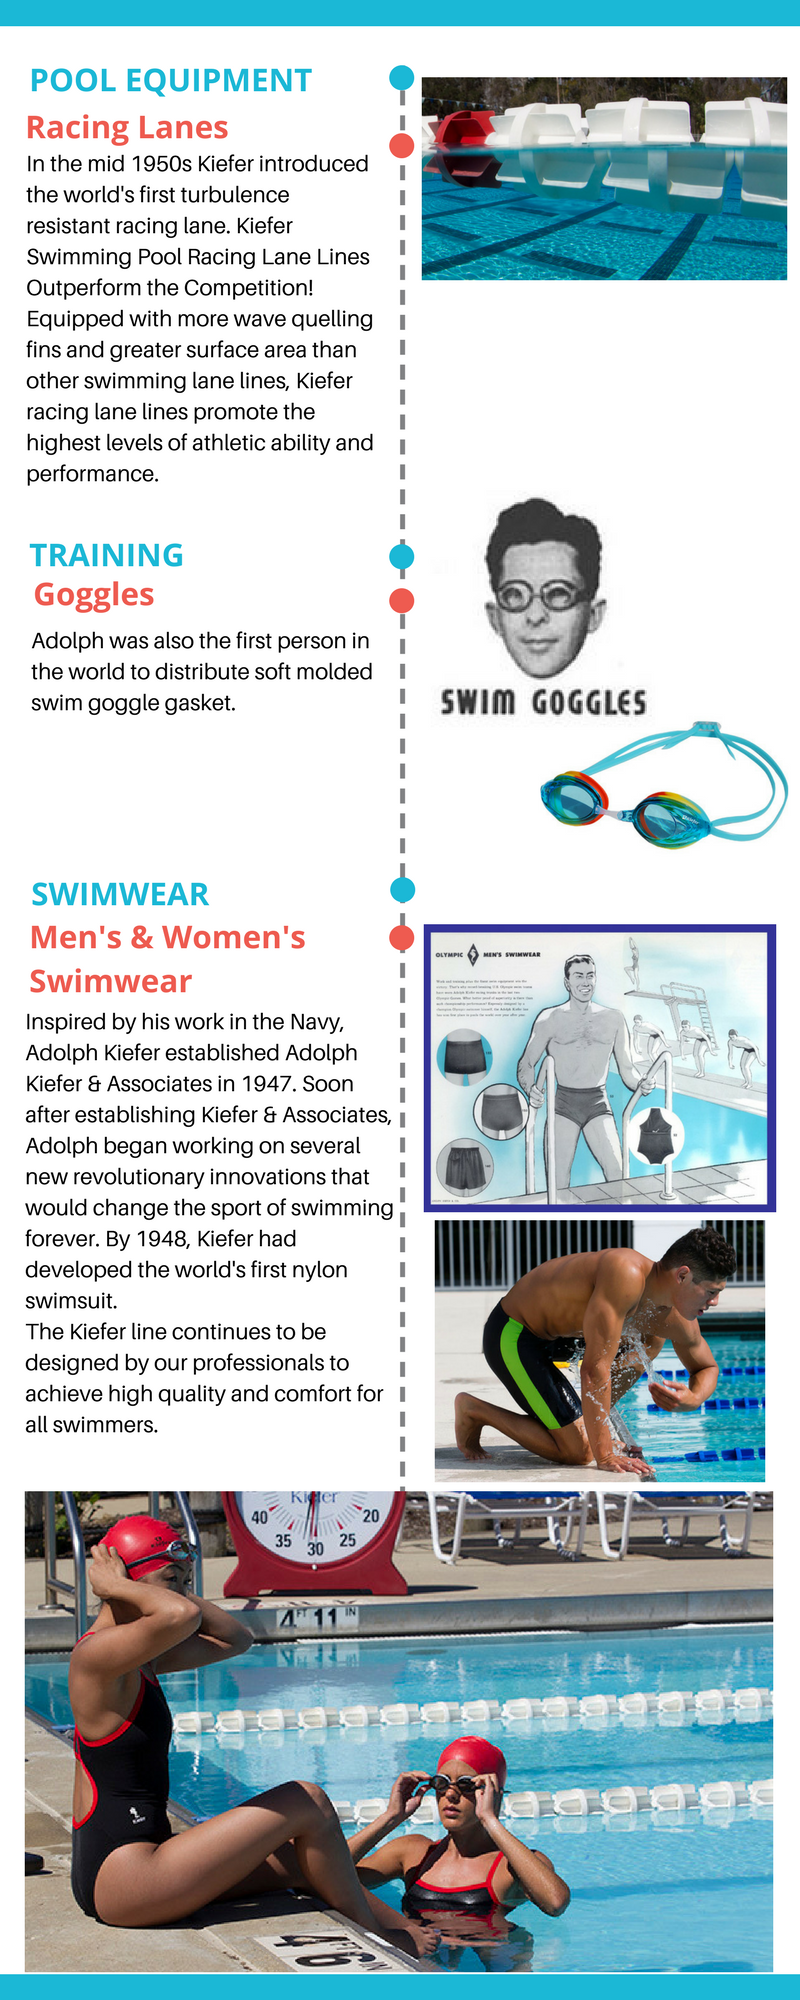 A History of Adolph Kiefer Innovations [INFOGRAPHIC]